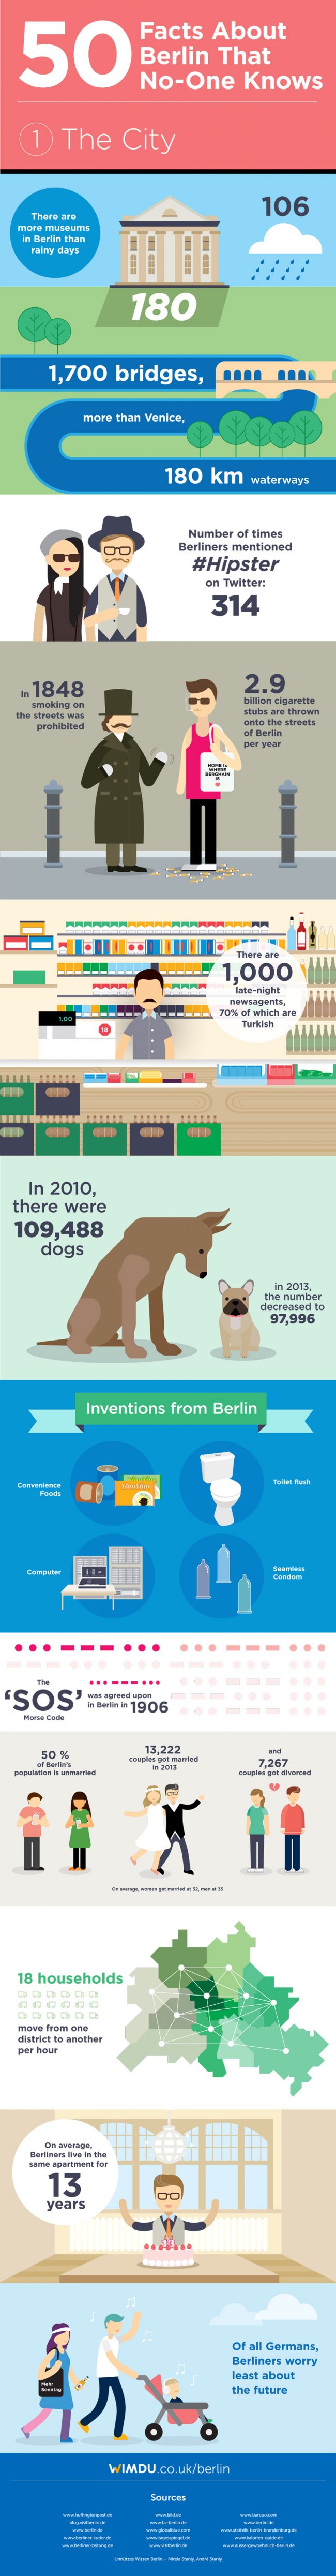 _BerlinFacts_1_TheCity